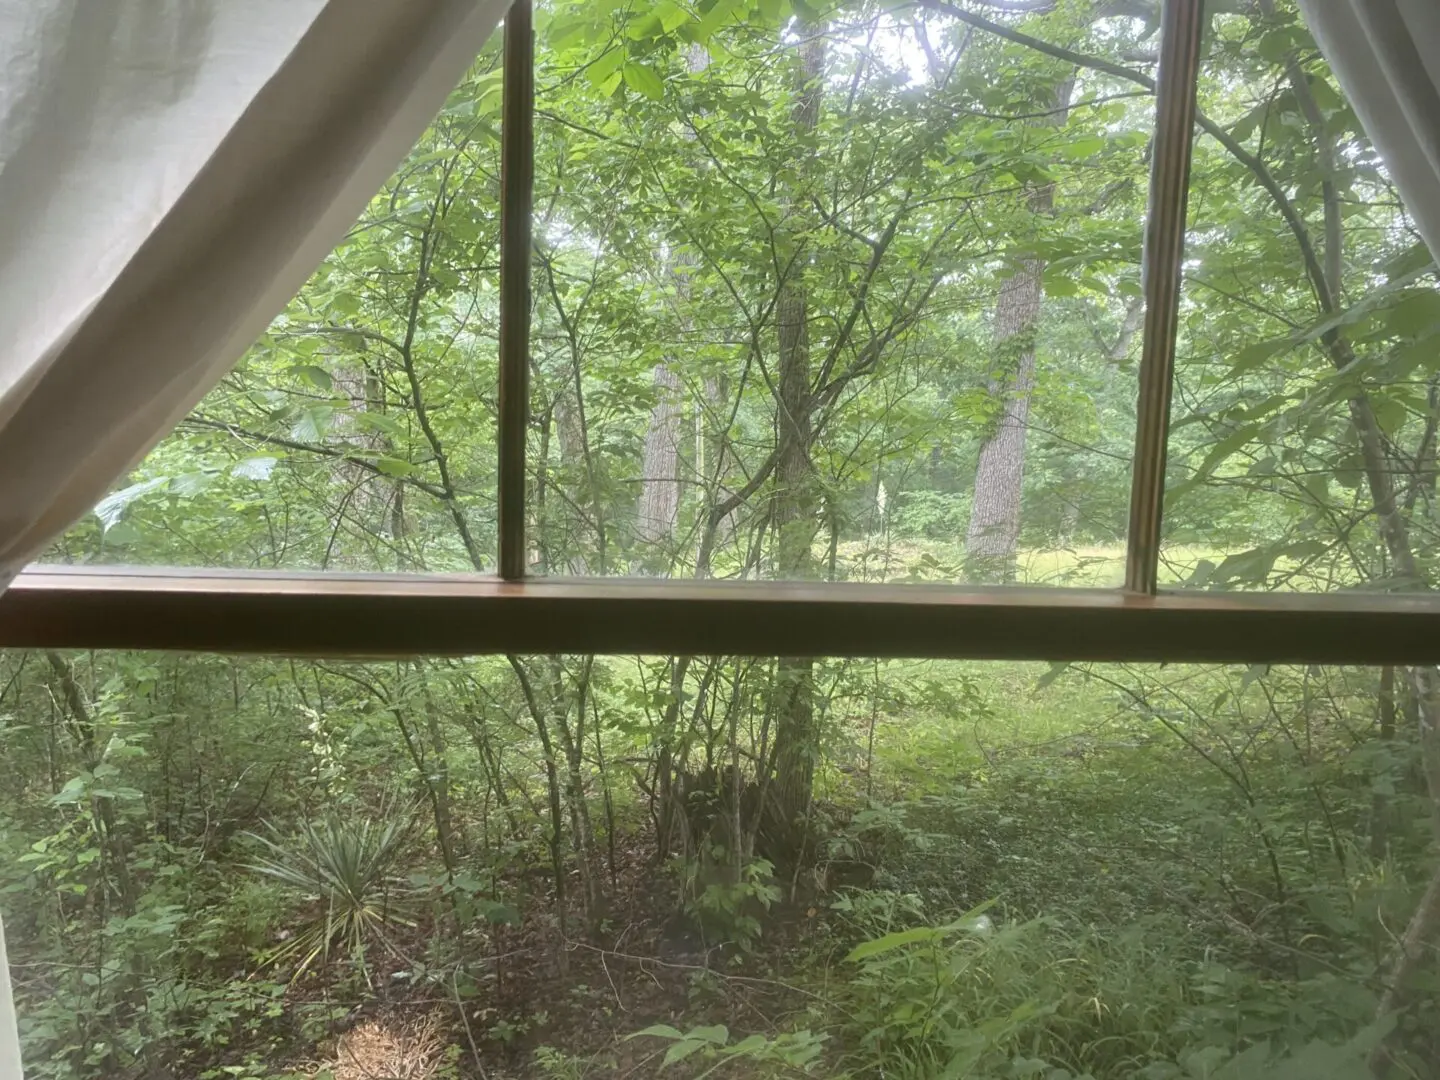 A view of trees from inside the window.